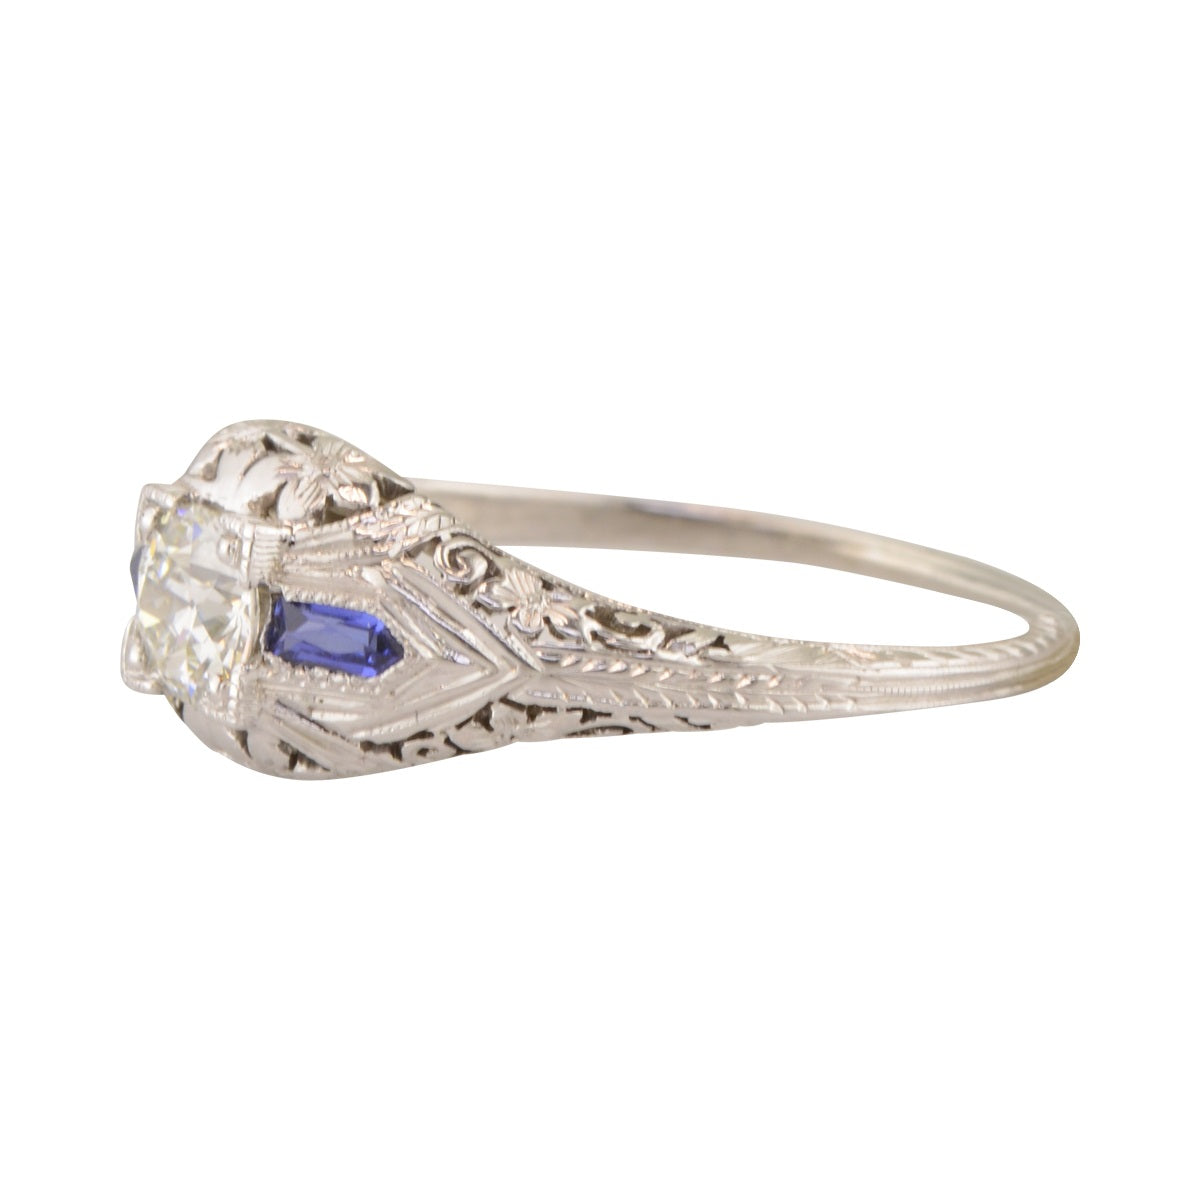 Filigree white gold engagement ring with sapphire accents. 